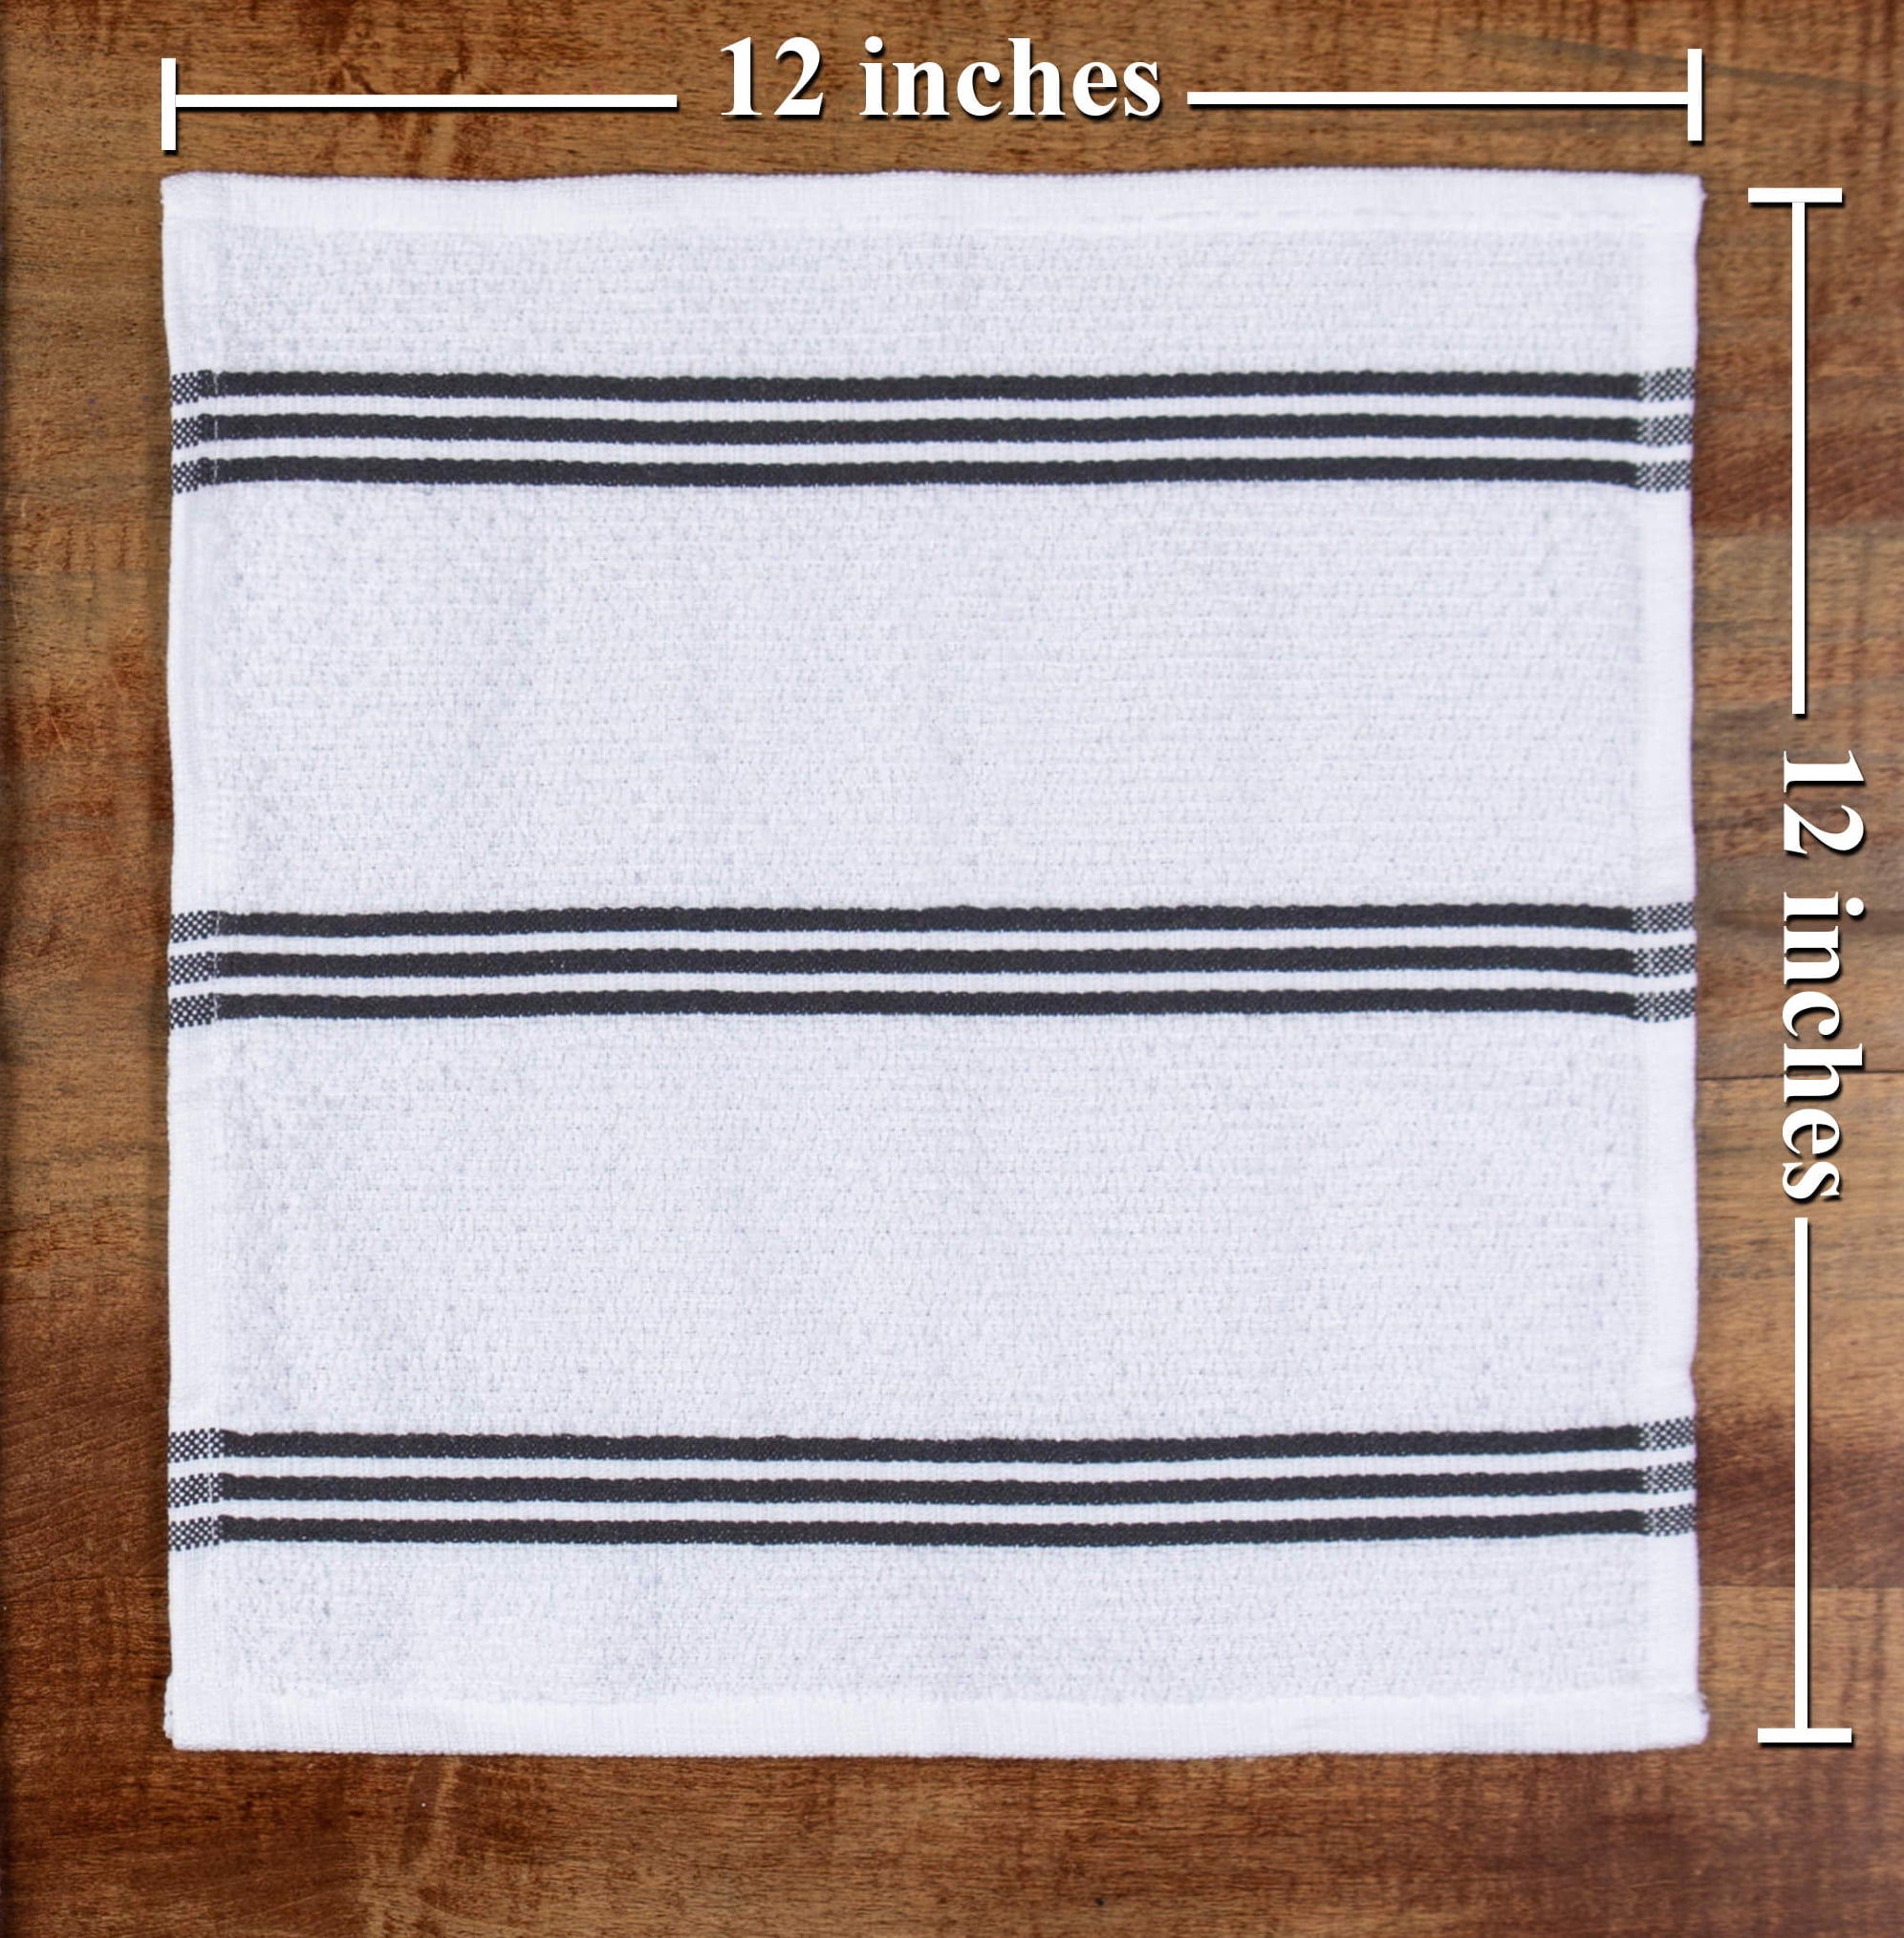 36 x 80 cm Soft Large Towel Bath Towel - Ideal for Everyday Use Christmas Clothes Threshold Kitchen Towels Dish Dish Washcloth Kitchen Counter Towels